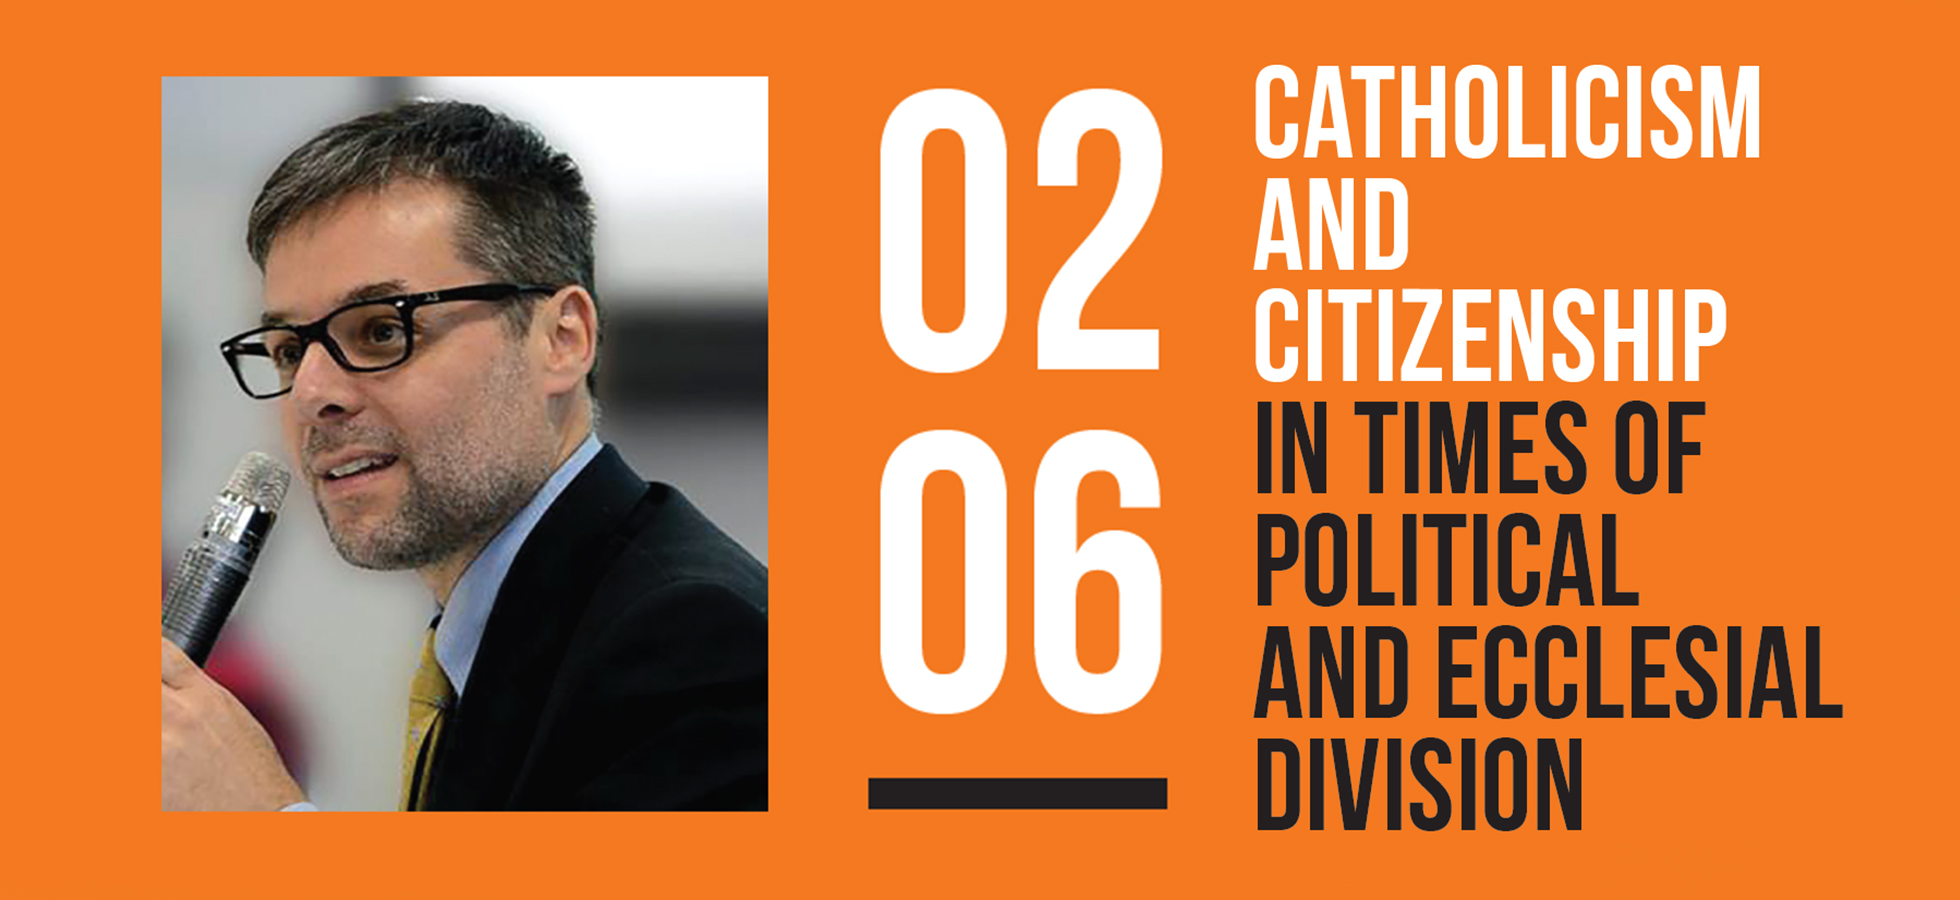 Catholics and Citizenship Lecture at Assumption College on February 6, 2020.